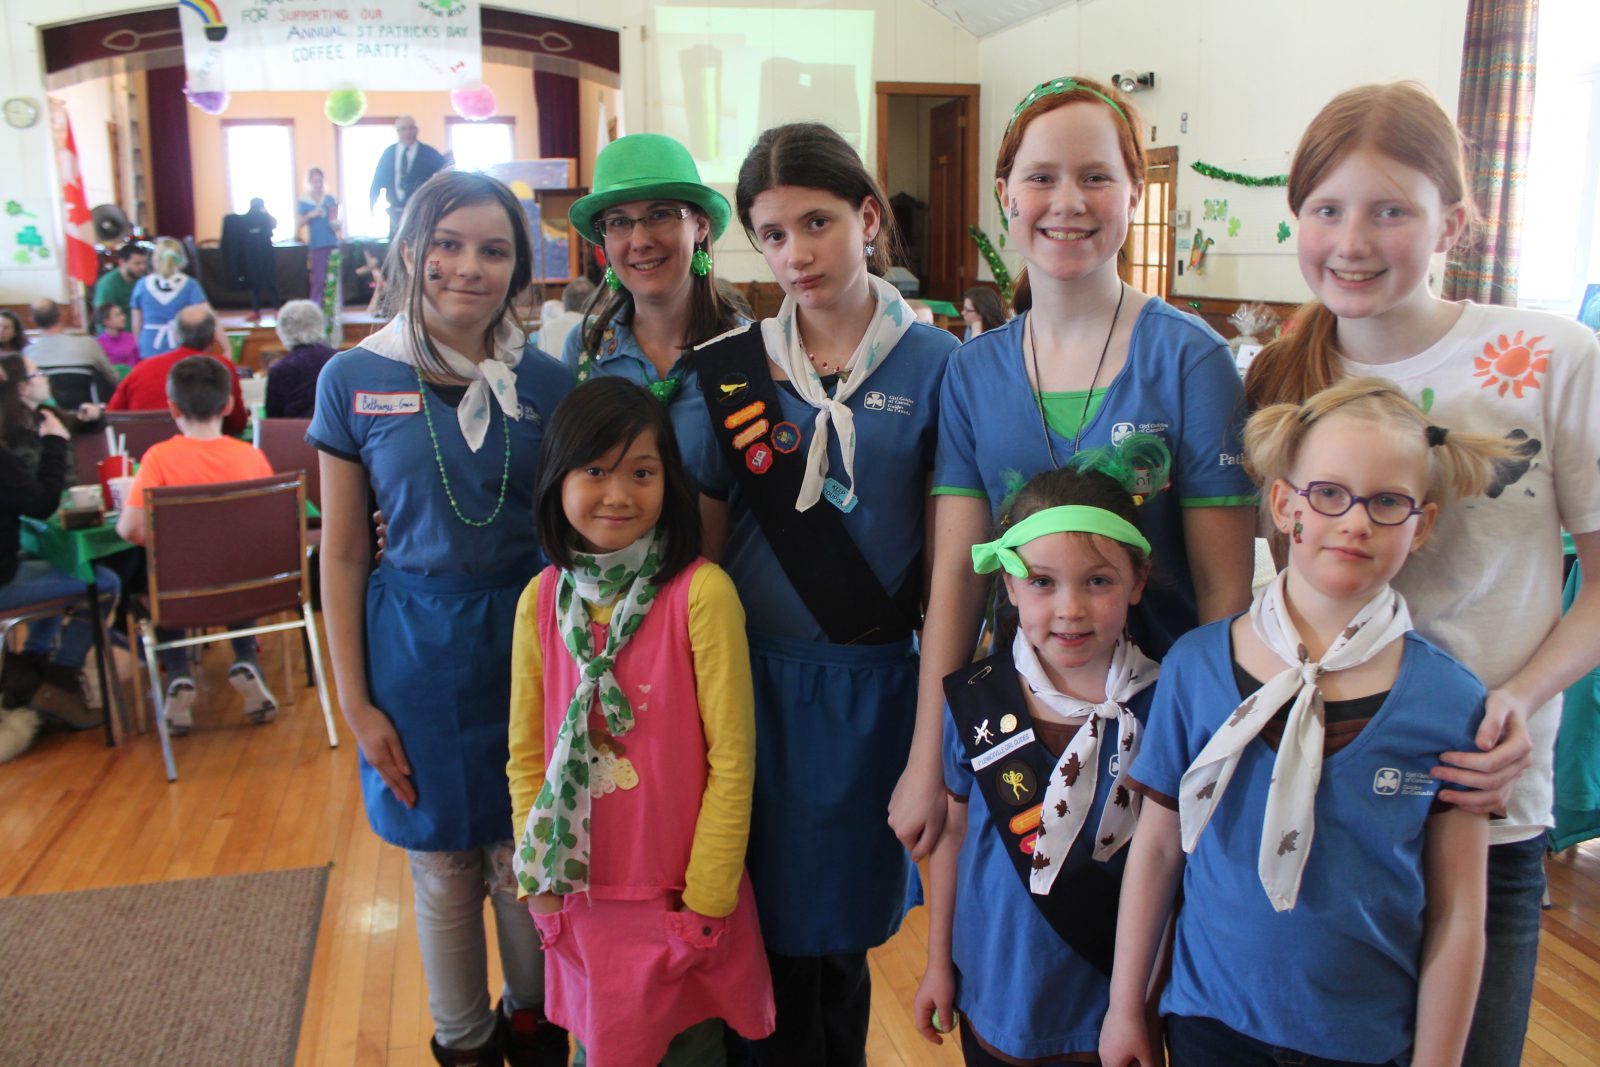 Girl guides put the “fun”  in fundraising